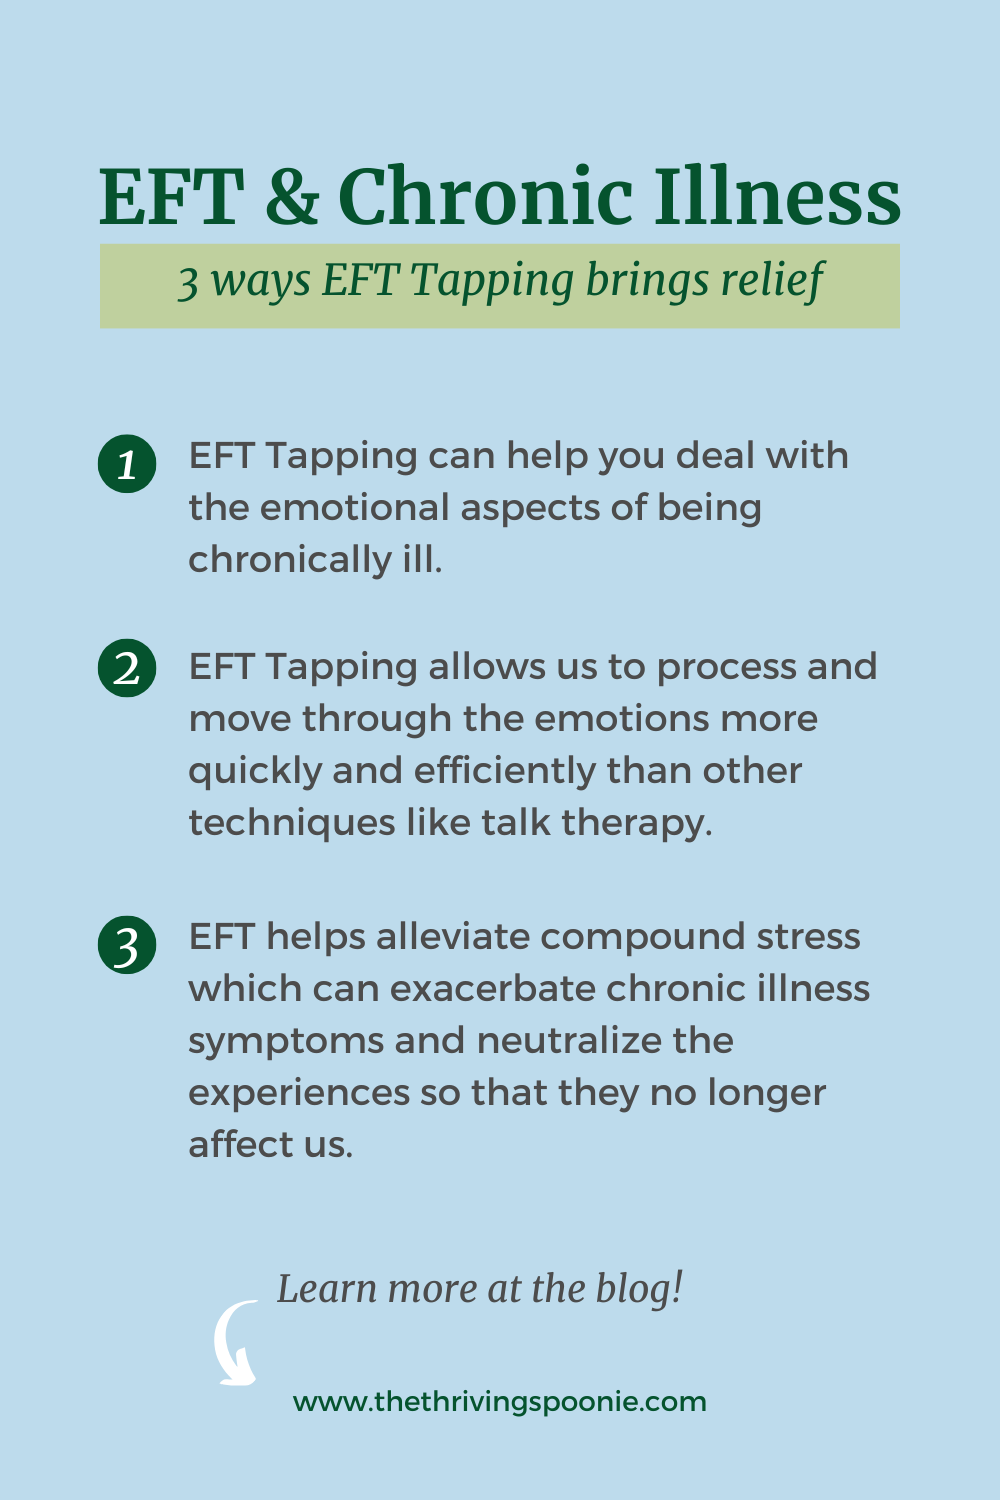 Everything You Need to Know About EFT Tapping for Chronic Illness